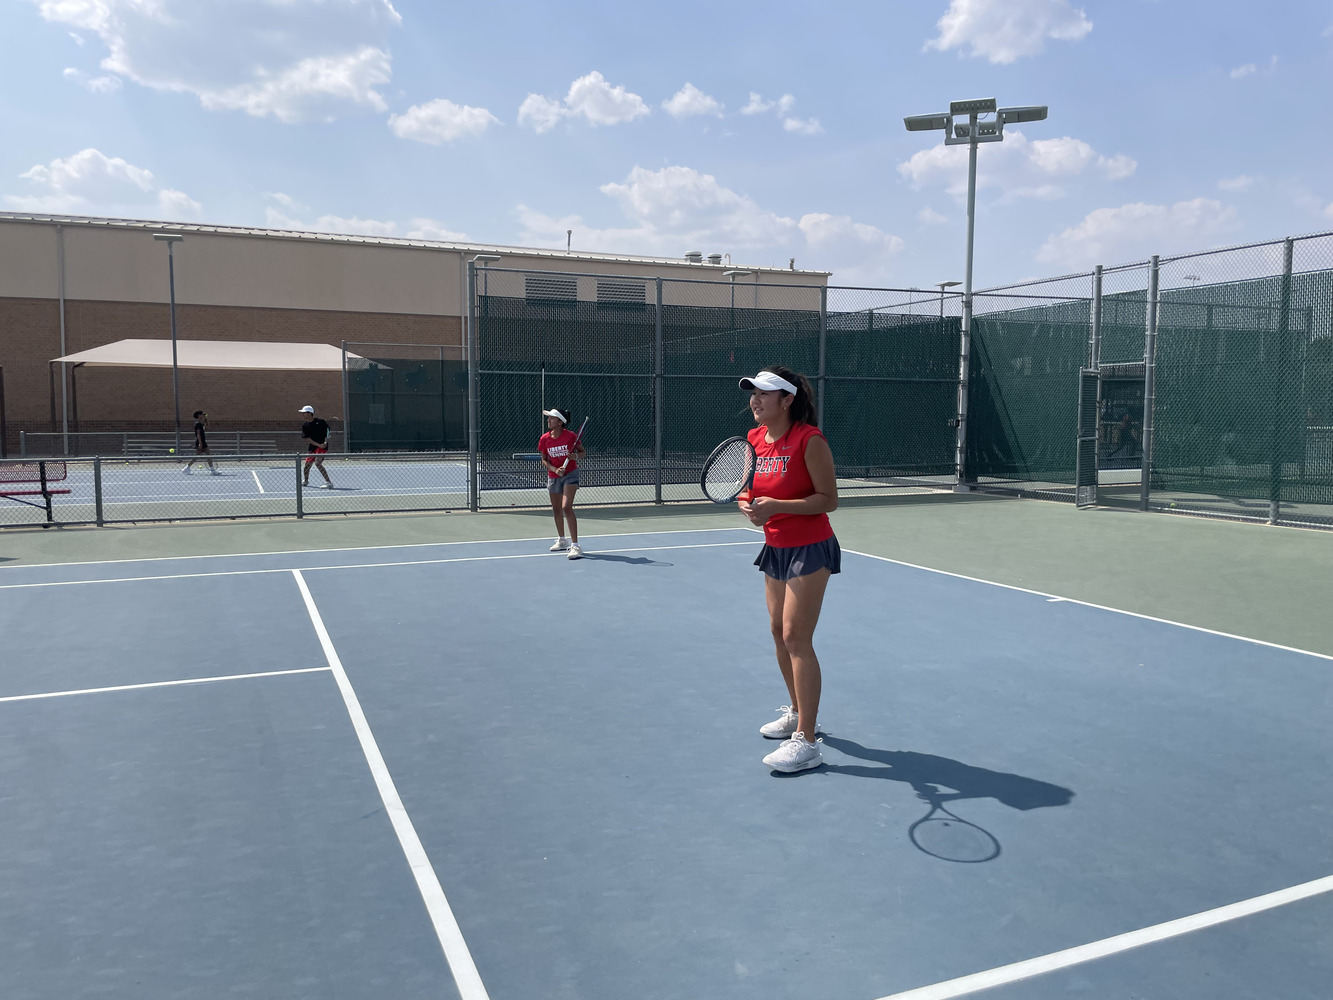 The #6 state-ranked Lebanon Trail Blazers defeated Redhawk tennis Tuesday in a 17-2 loss. “We came up short, [but] overall I was proud of how our team competed, despite the result,” assistant tennis coach Neil Grobler said.